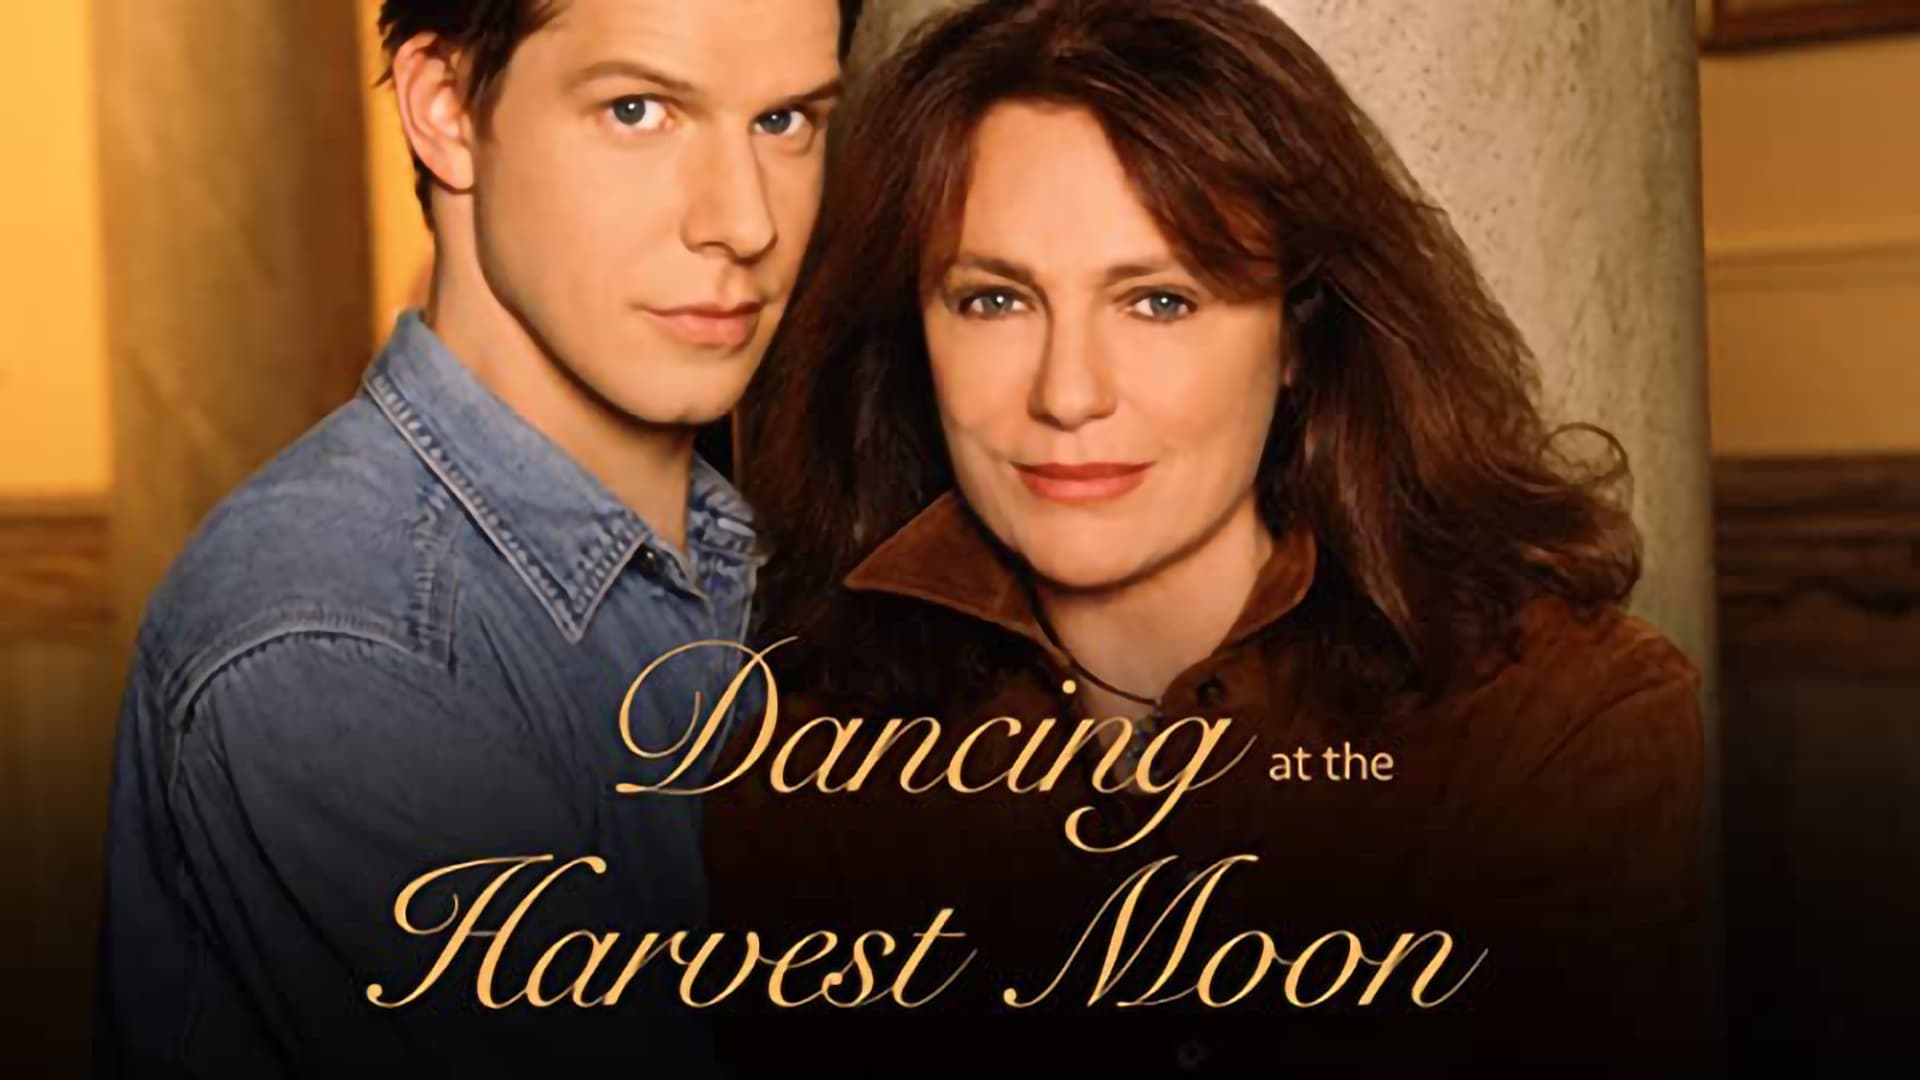 Dancing at the Harvest Moon (2002)